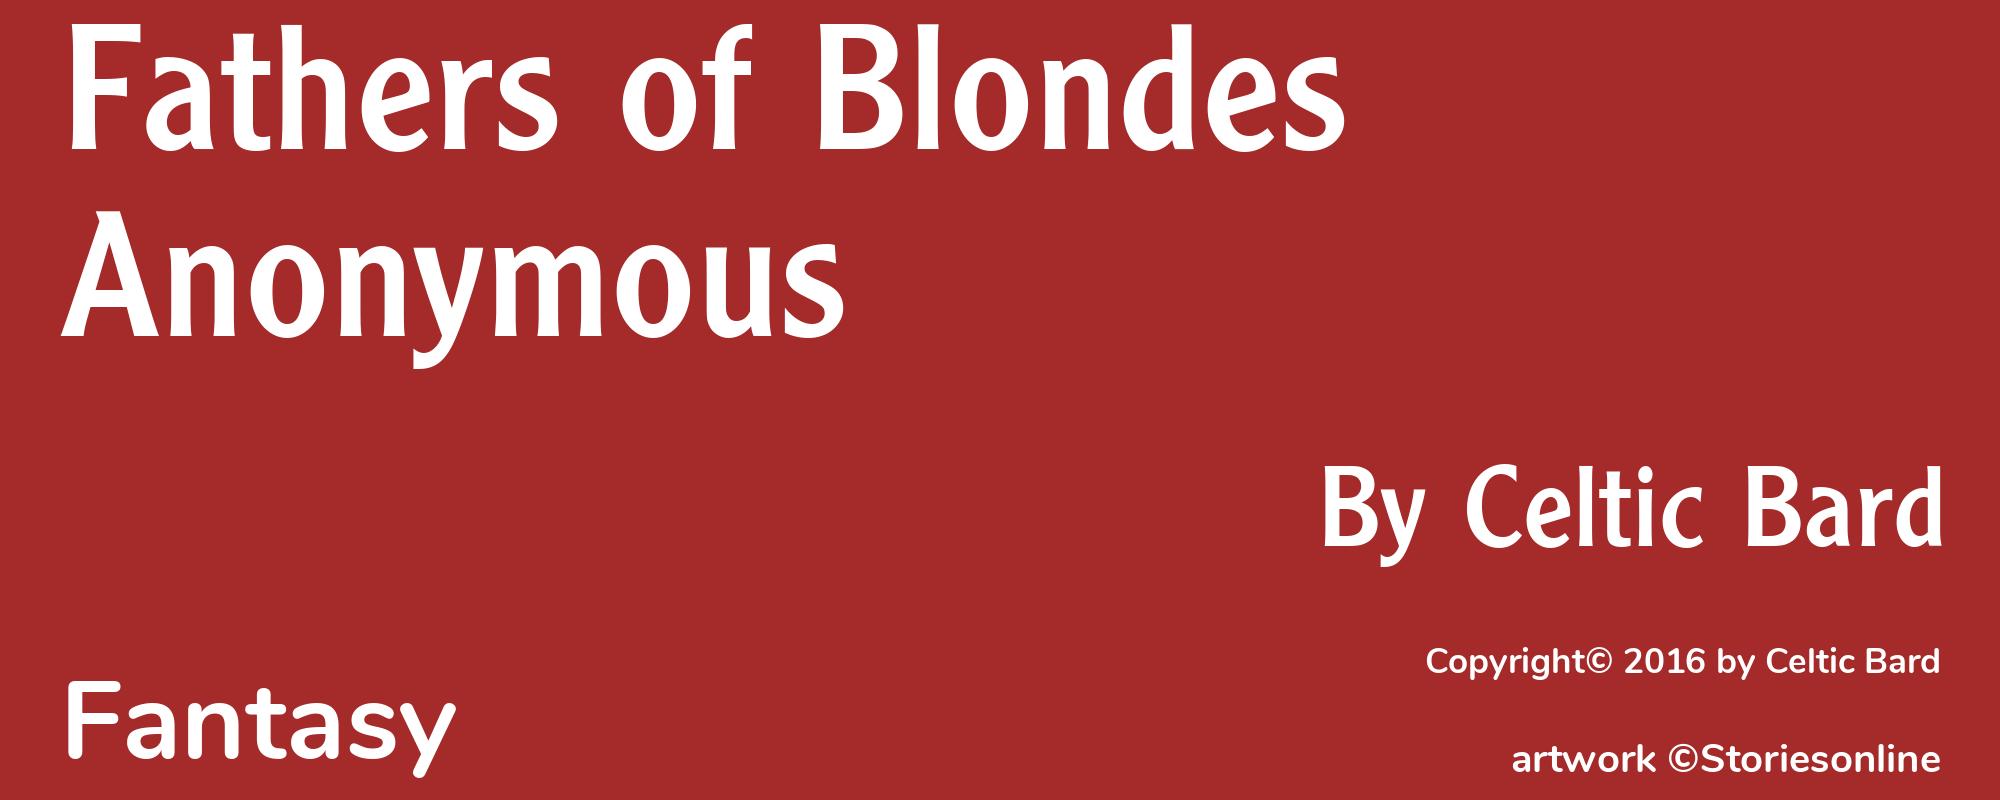 Fathers of Blondes Anonymous - Cover